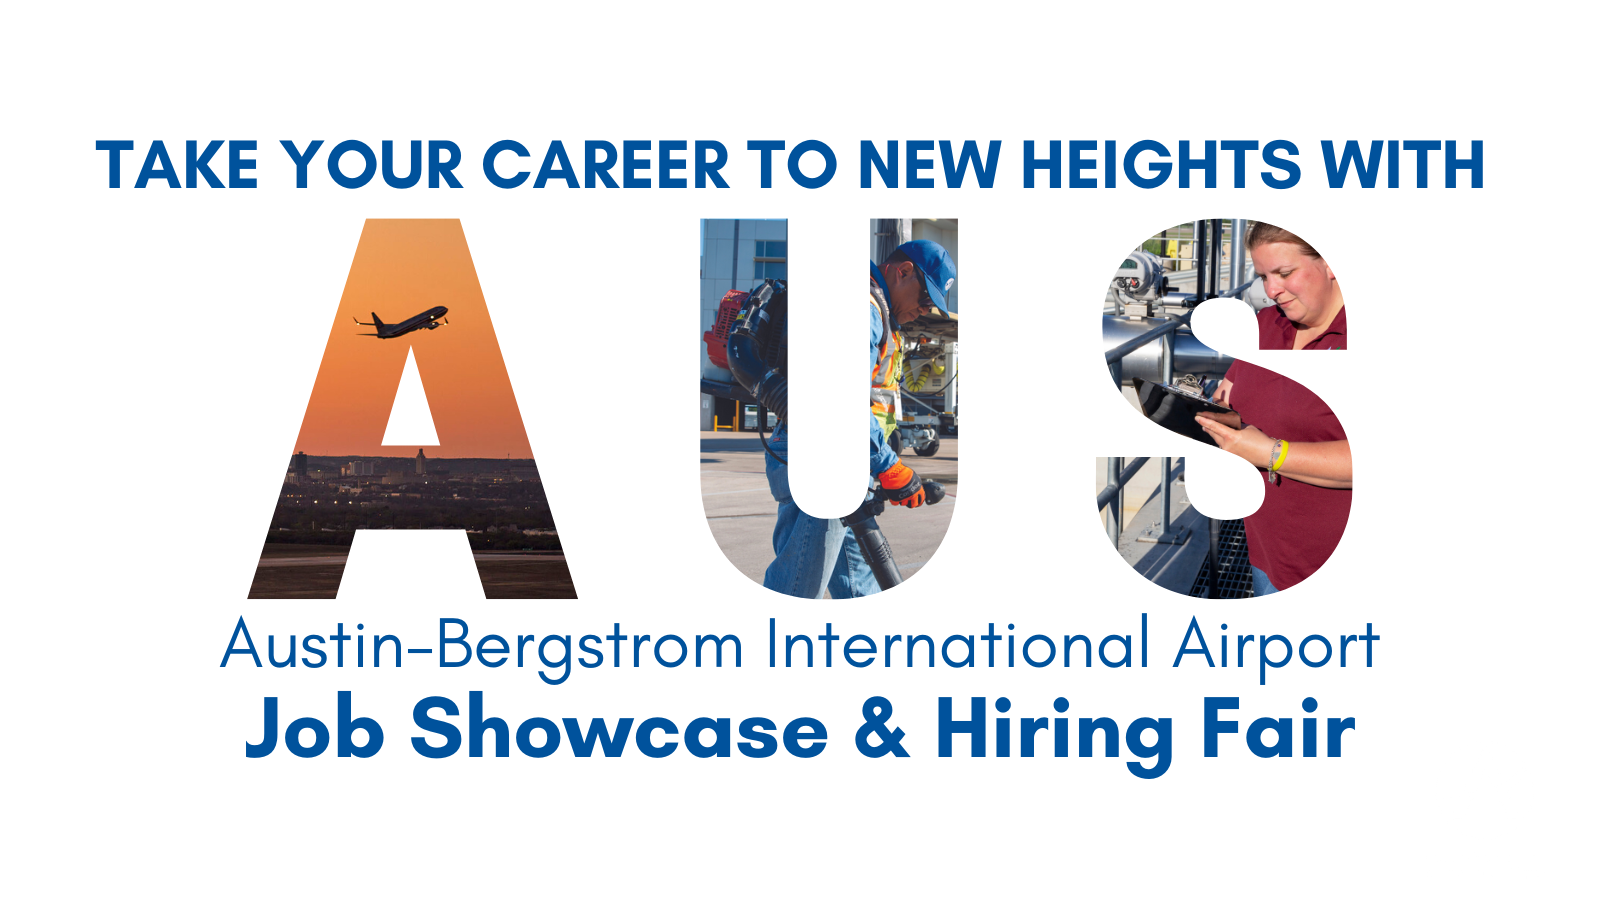 Text reads: Take your career to new heights with AUS. Austin-bergstrom international airport job showcase & hiring fair